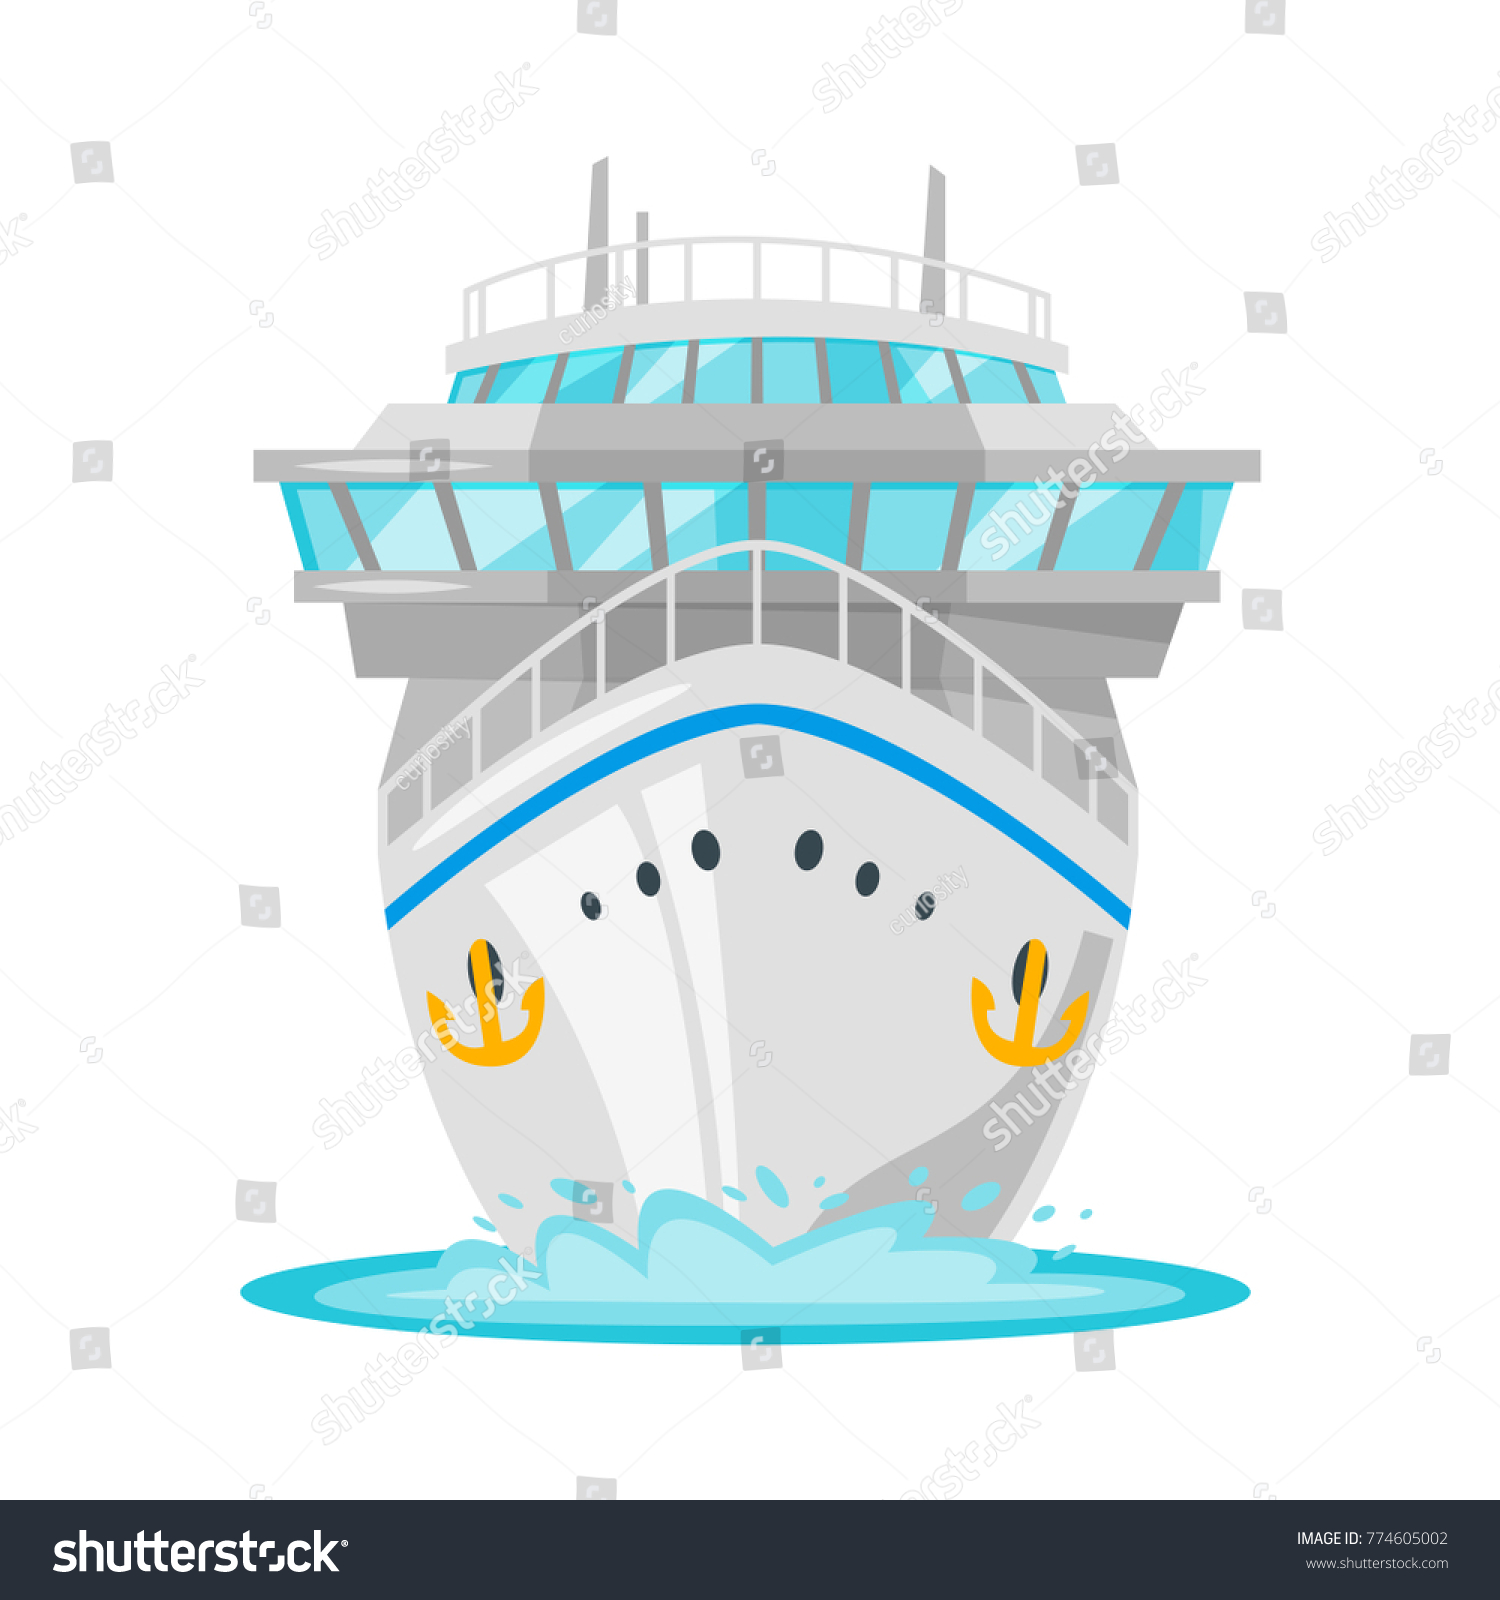 SVG of Vector cartoon style illustration of cruise ship - front view. Travel and tourism transport. svg